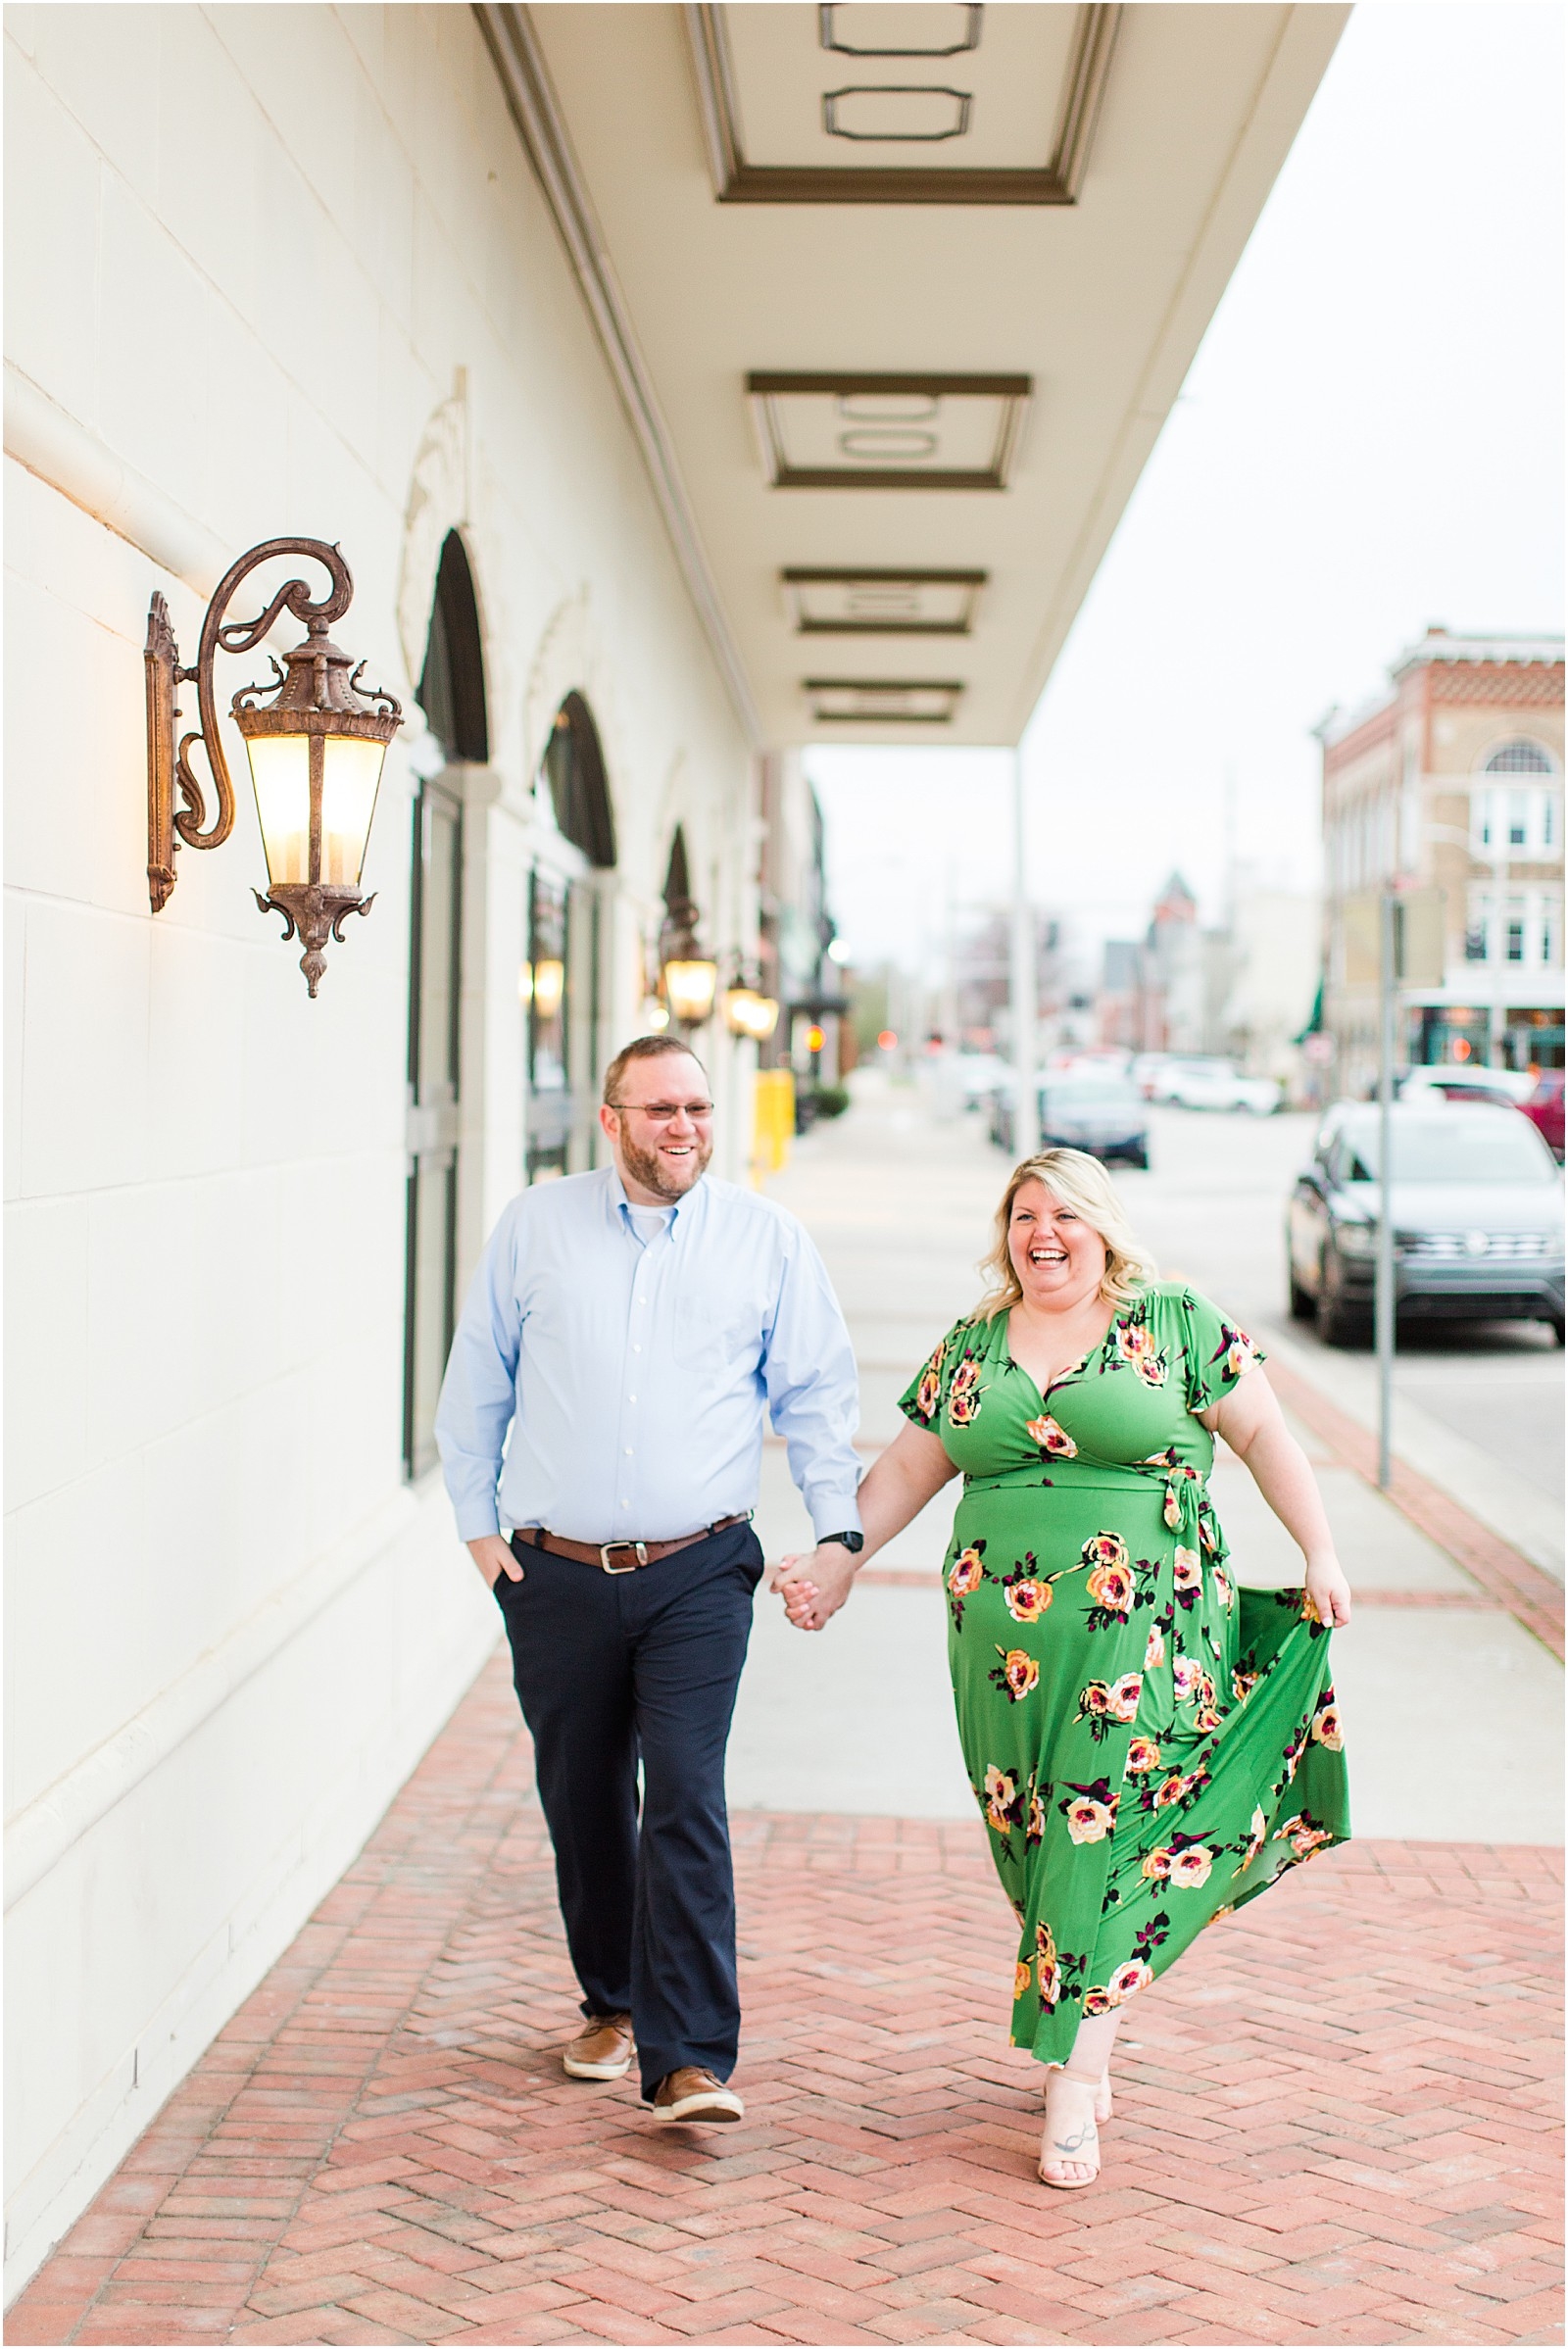 A Downtown Owensboro Engagement Session | Brittany and Neil | Engaged | | 0021.jpg